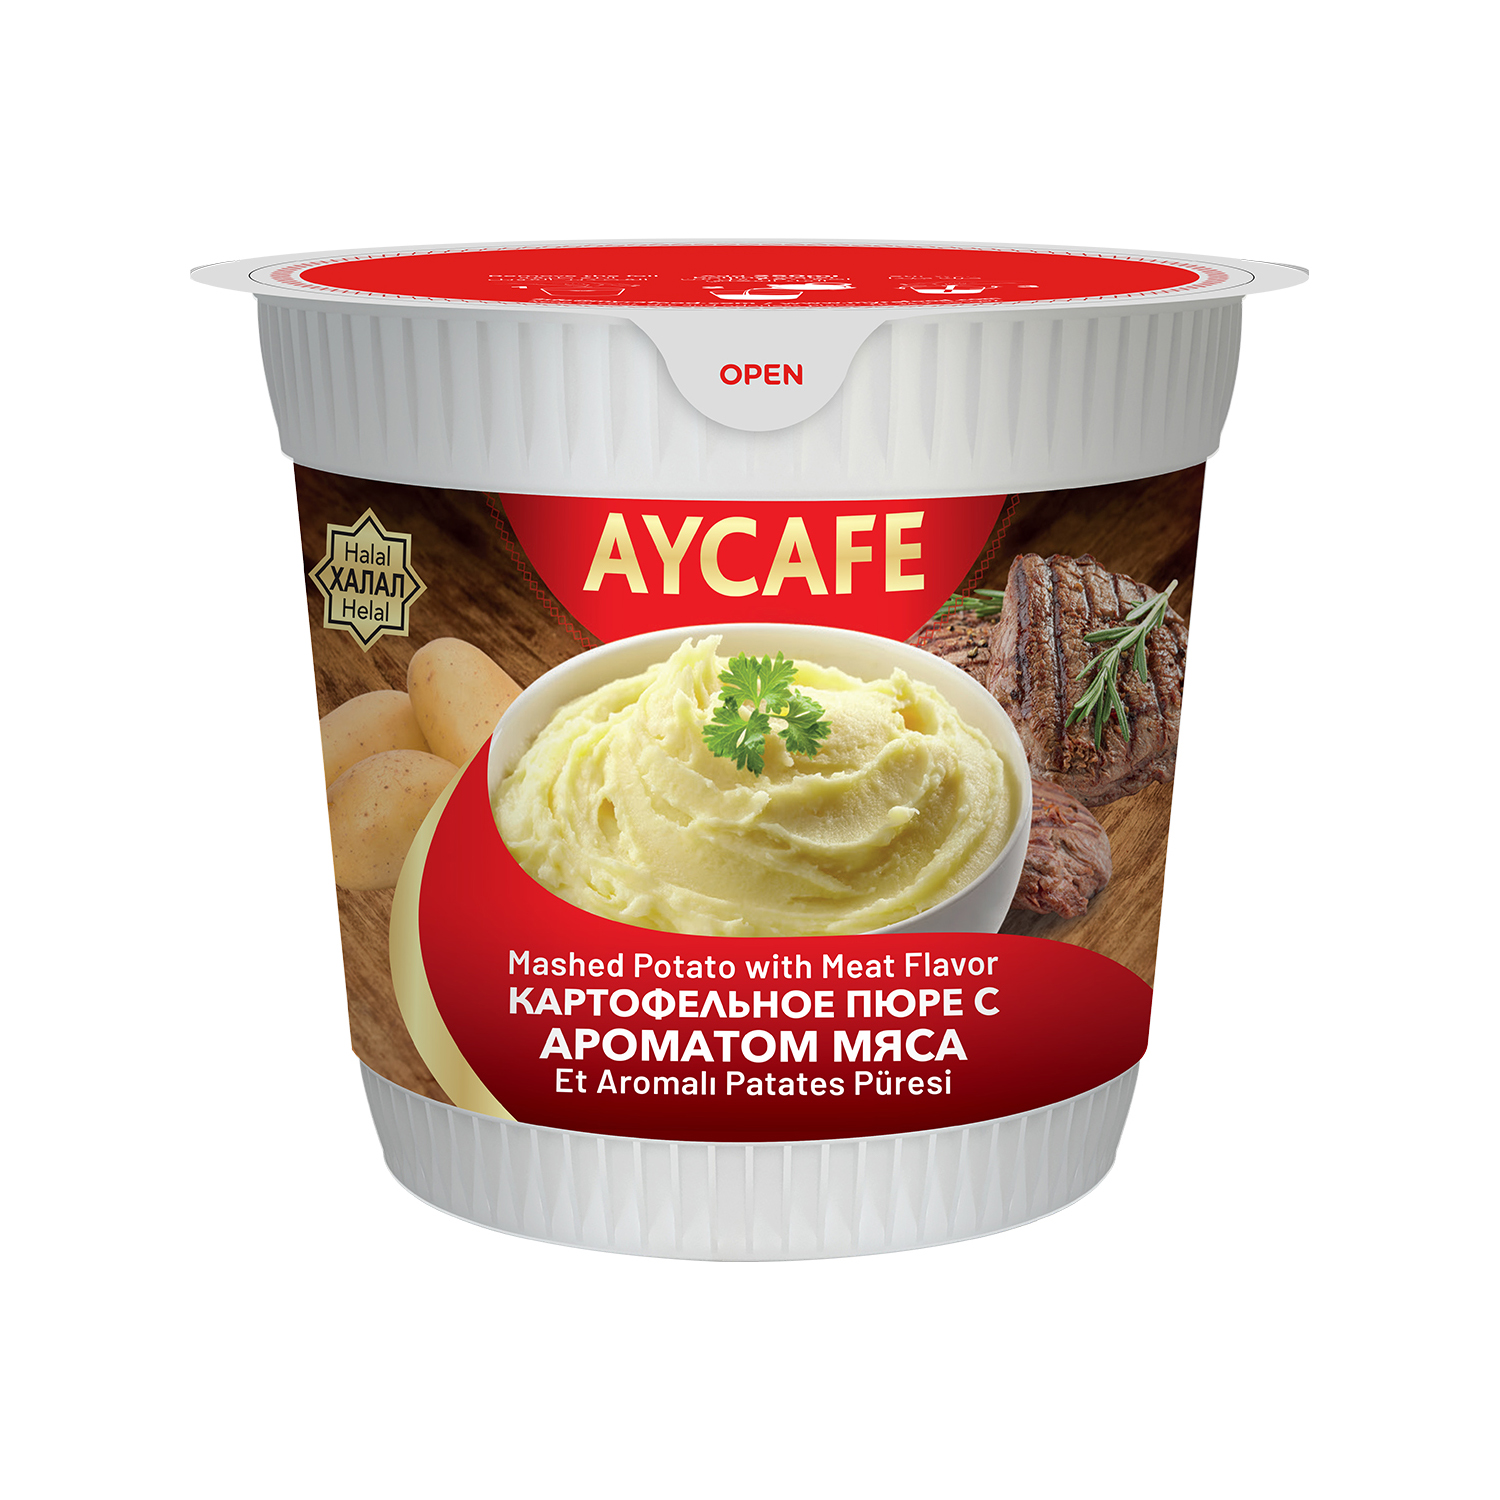 Aycafe Mashed Potato with Meat Flavor